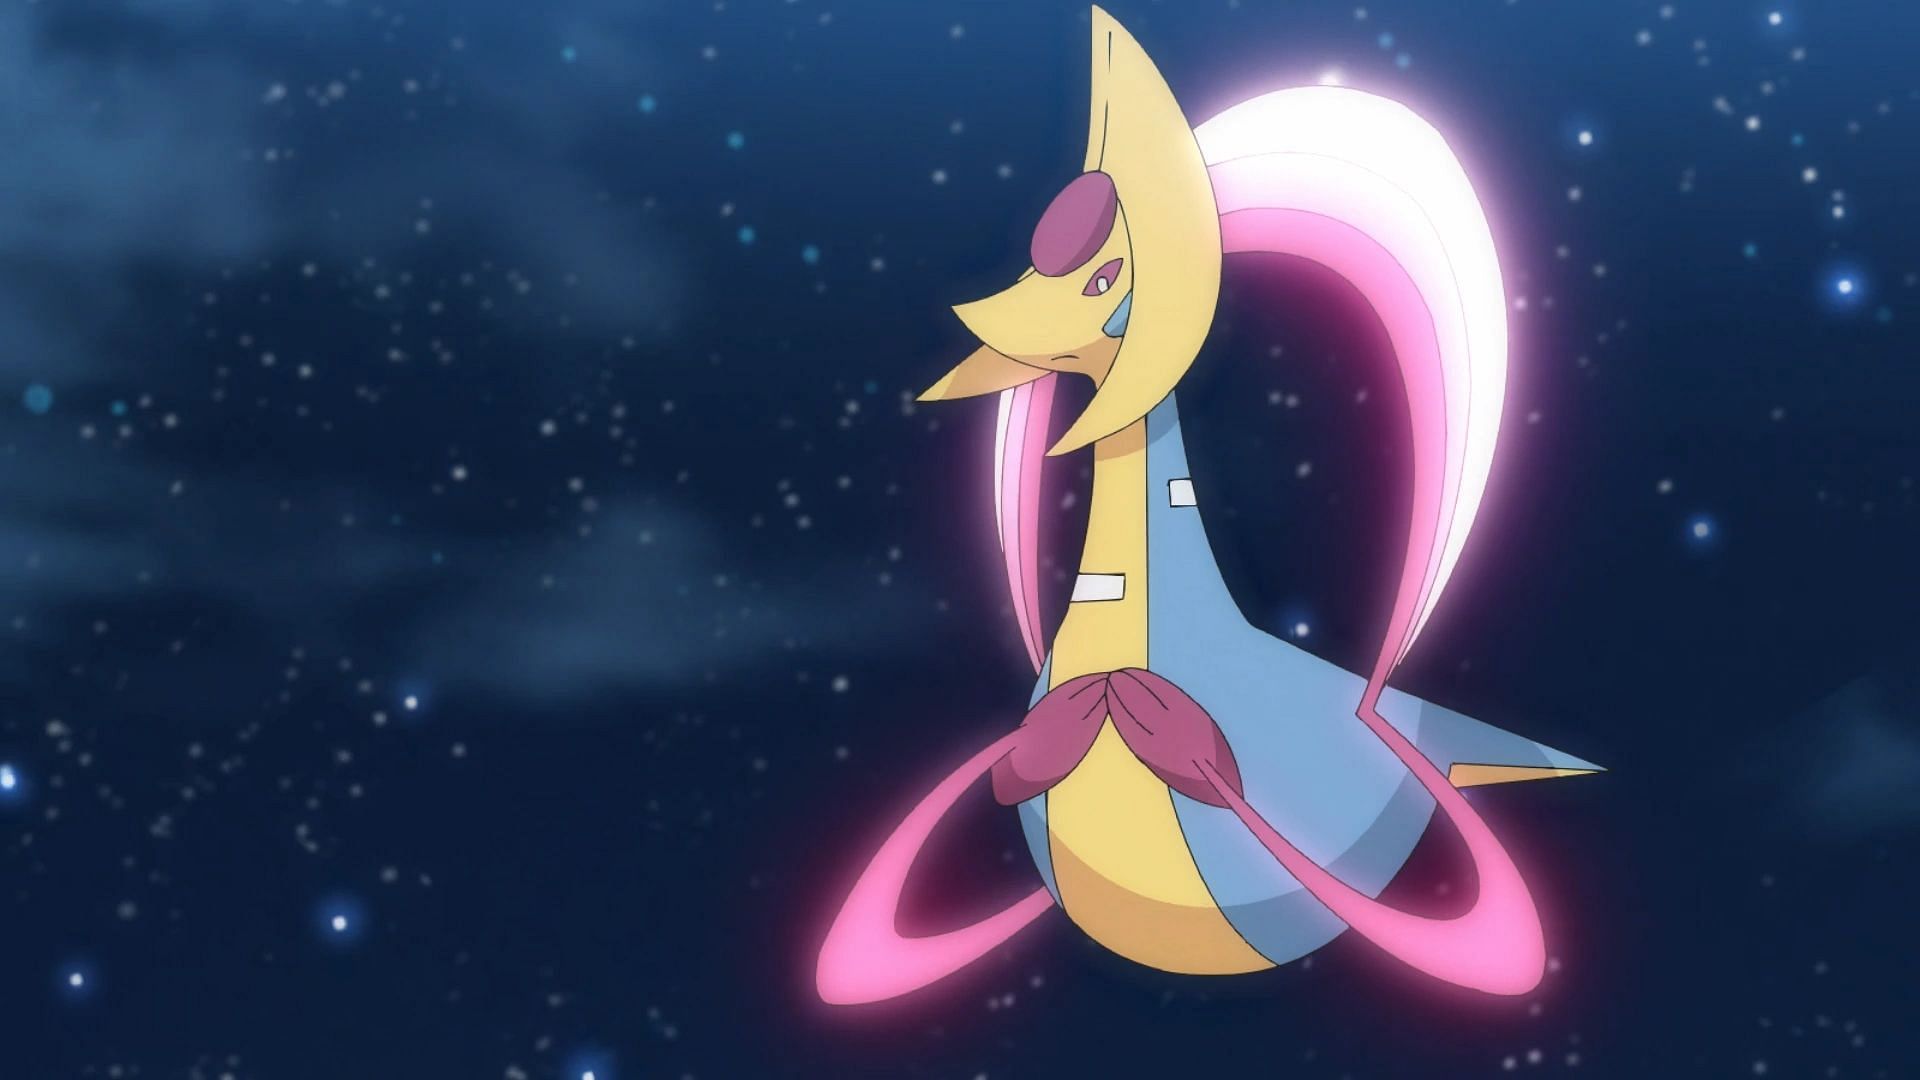 Cresselia as it appears in the anime (Image via Niantic)